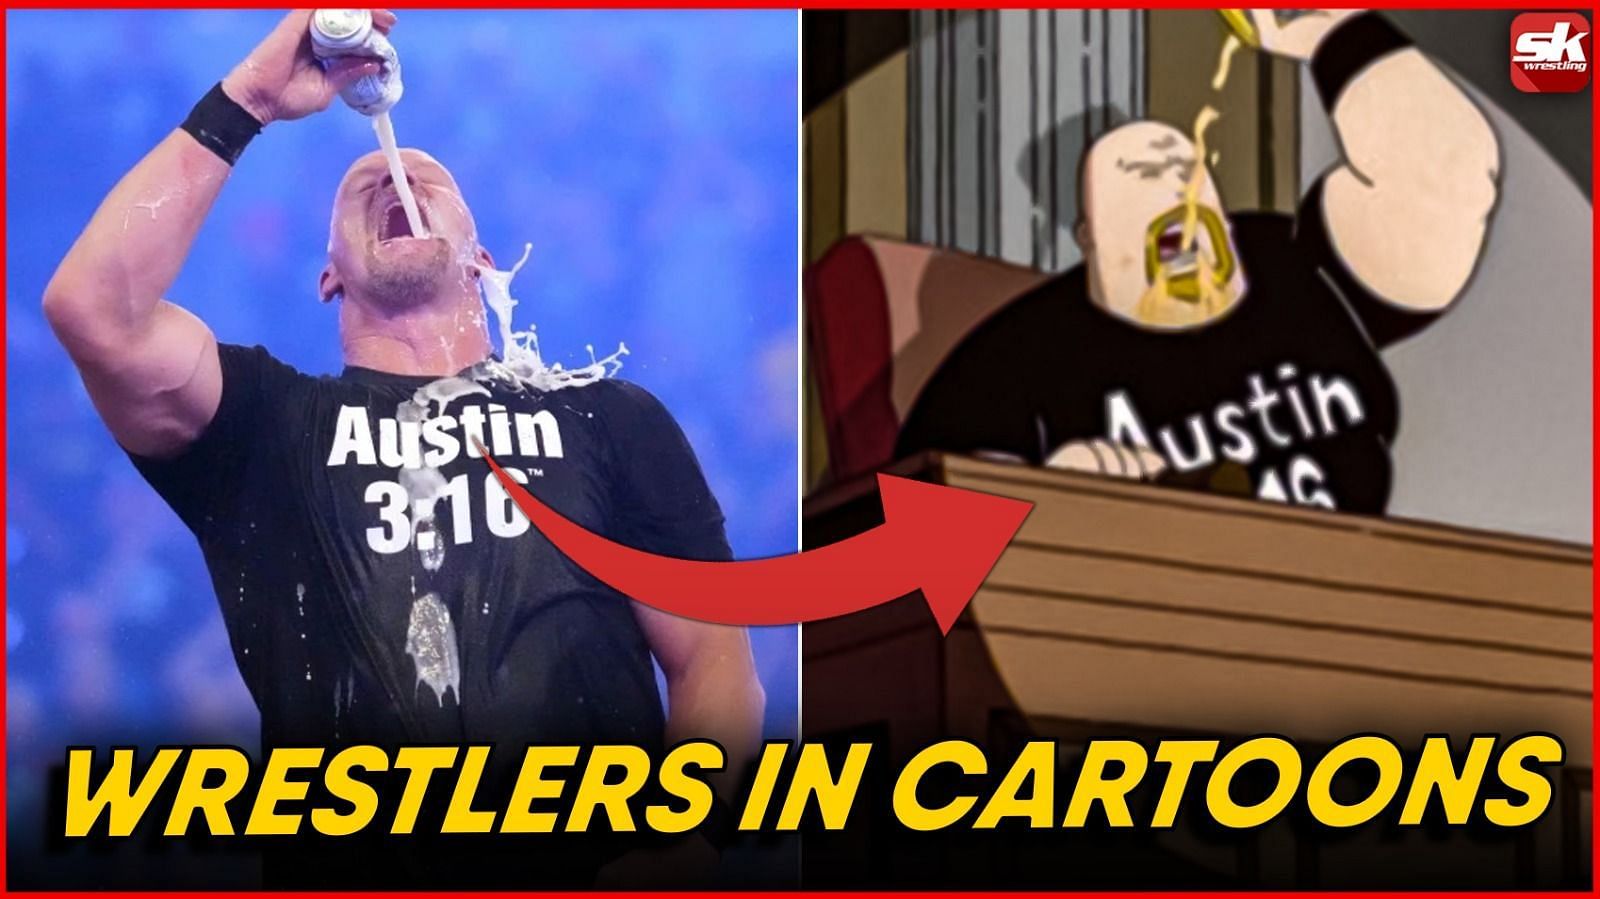 10 Wrestlers who appeared in Cartoons